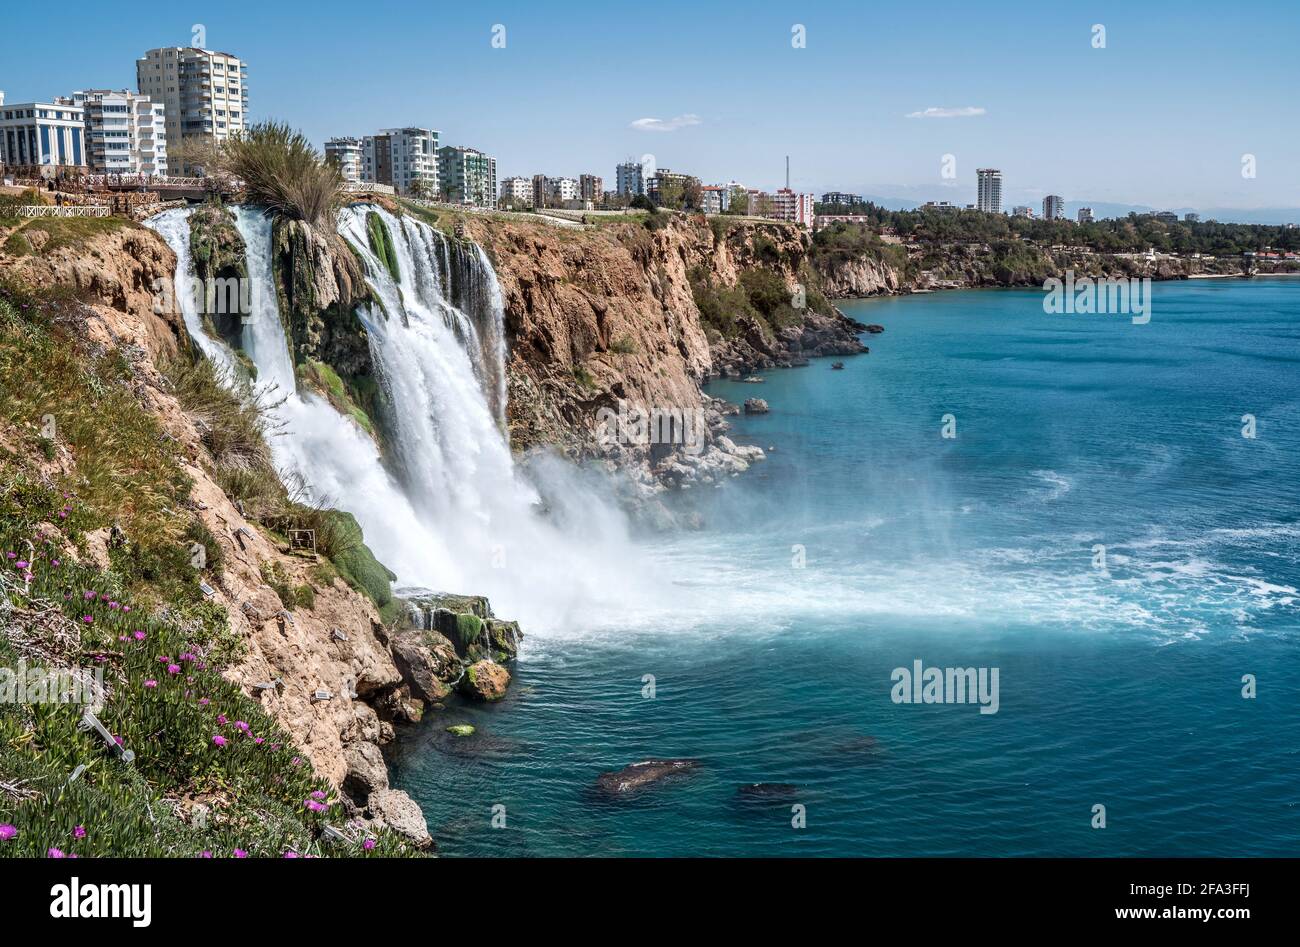 Lower Düden Falls drop off a rocky cliff falling from about 40 m into the Mediterranean Sea in amazing water clouds. Tourism and travel destination ph Stock Photo